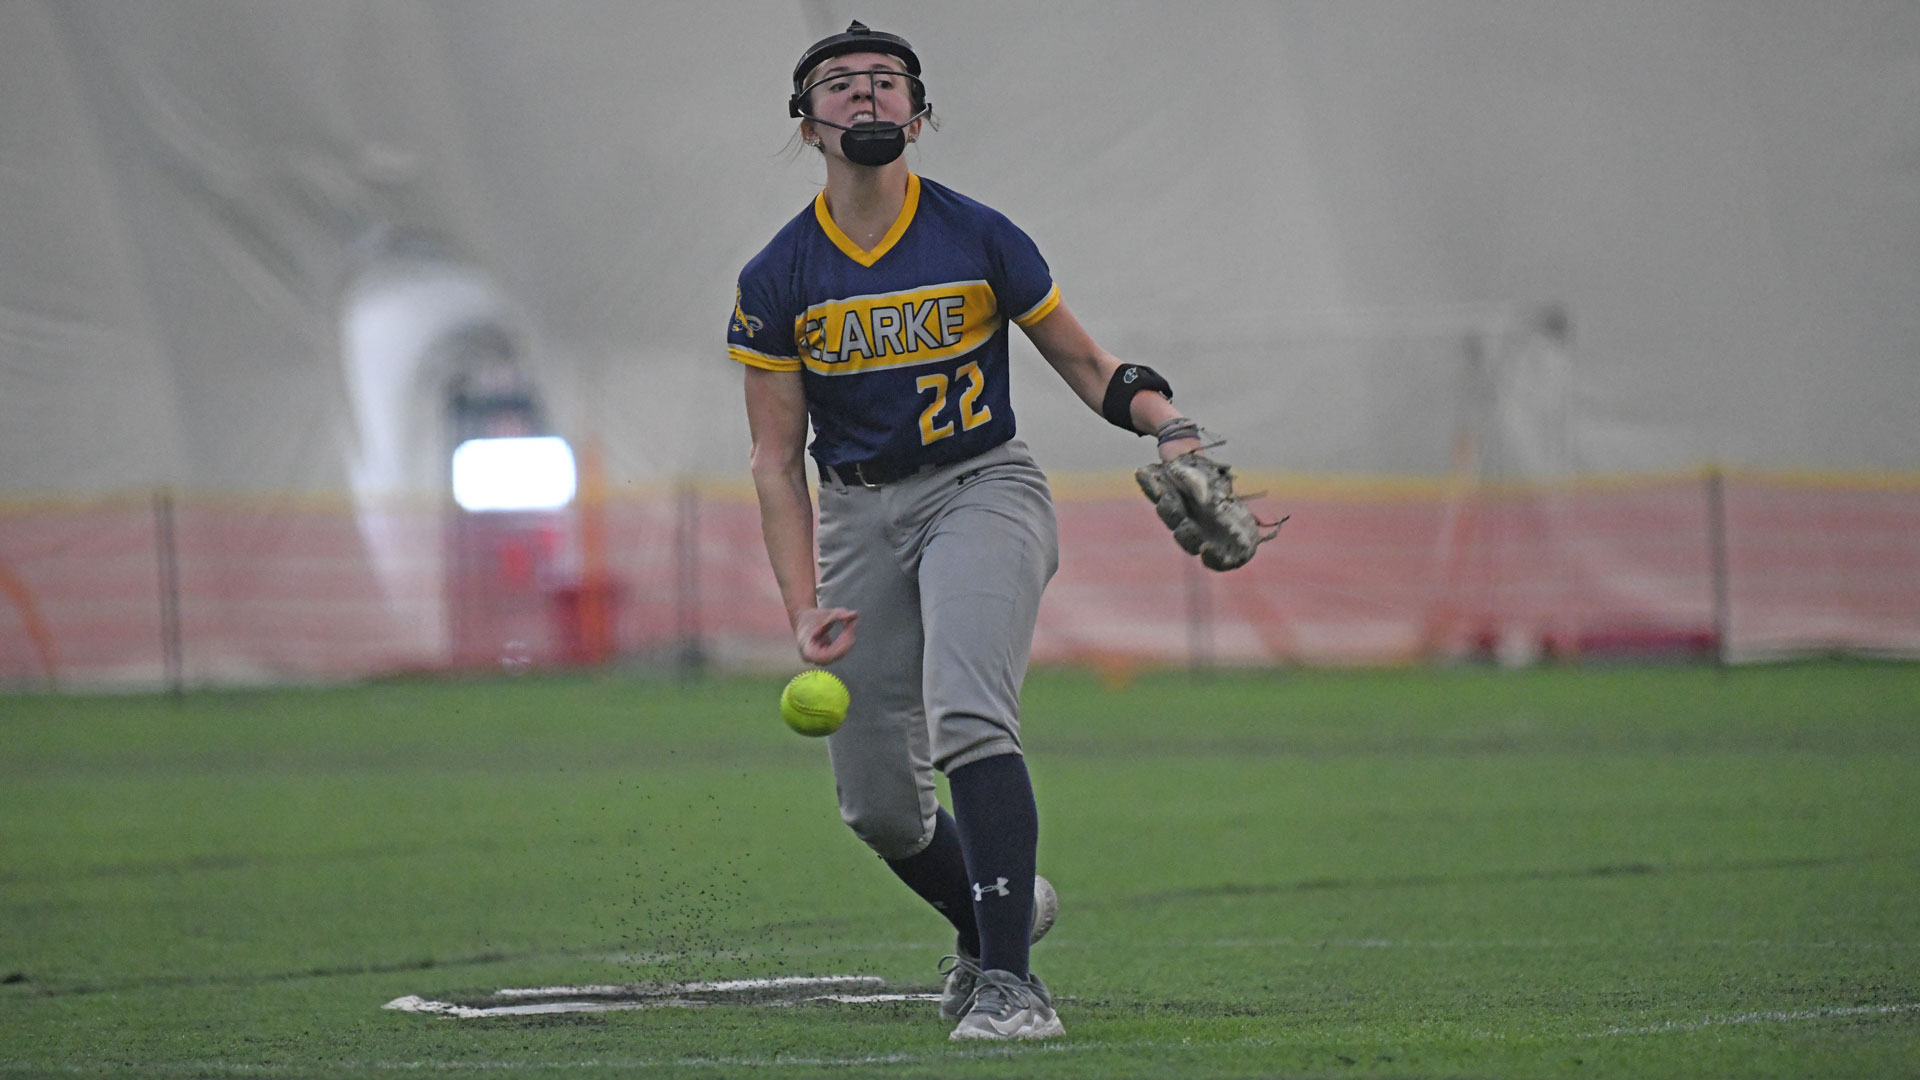 Pride fall twice in doubleheader at No. 3 Central Methodist